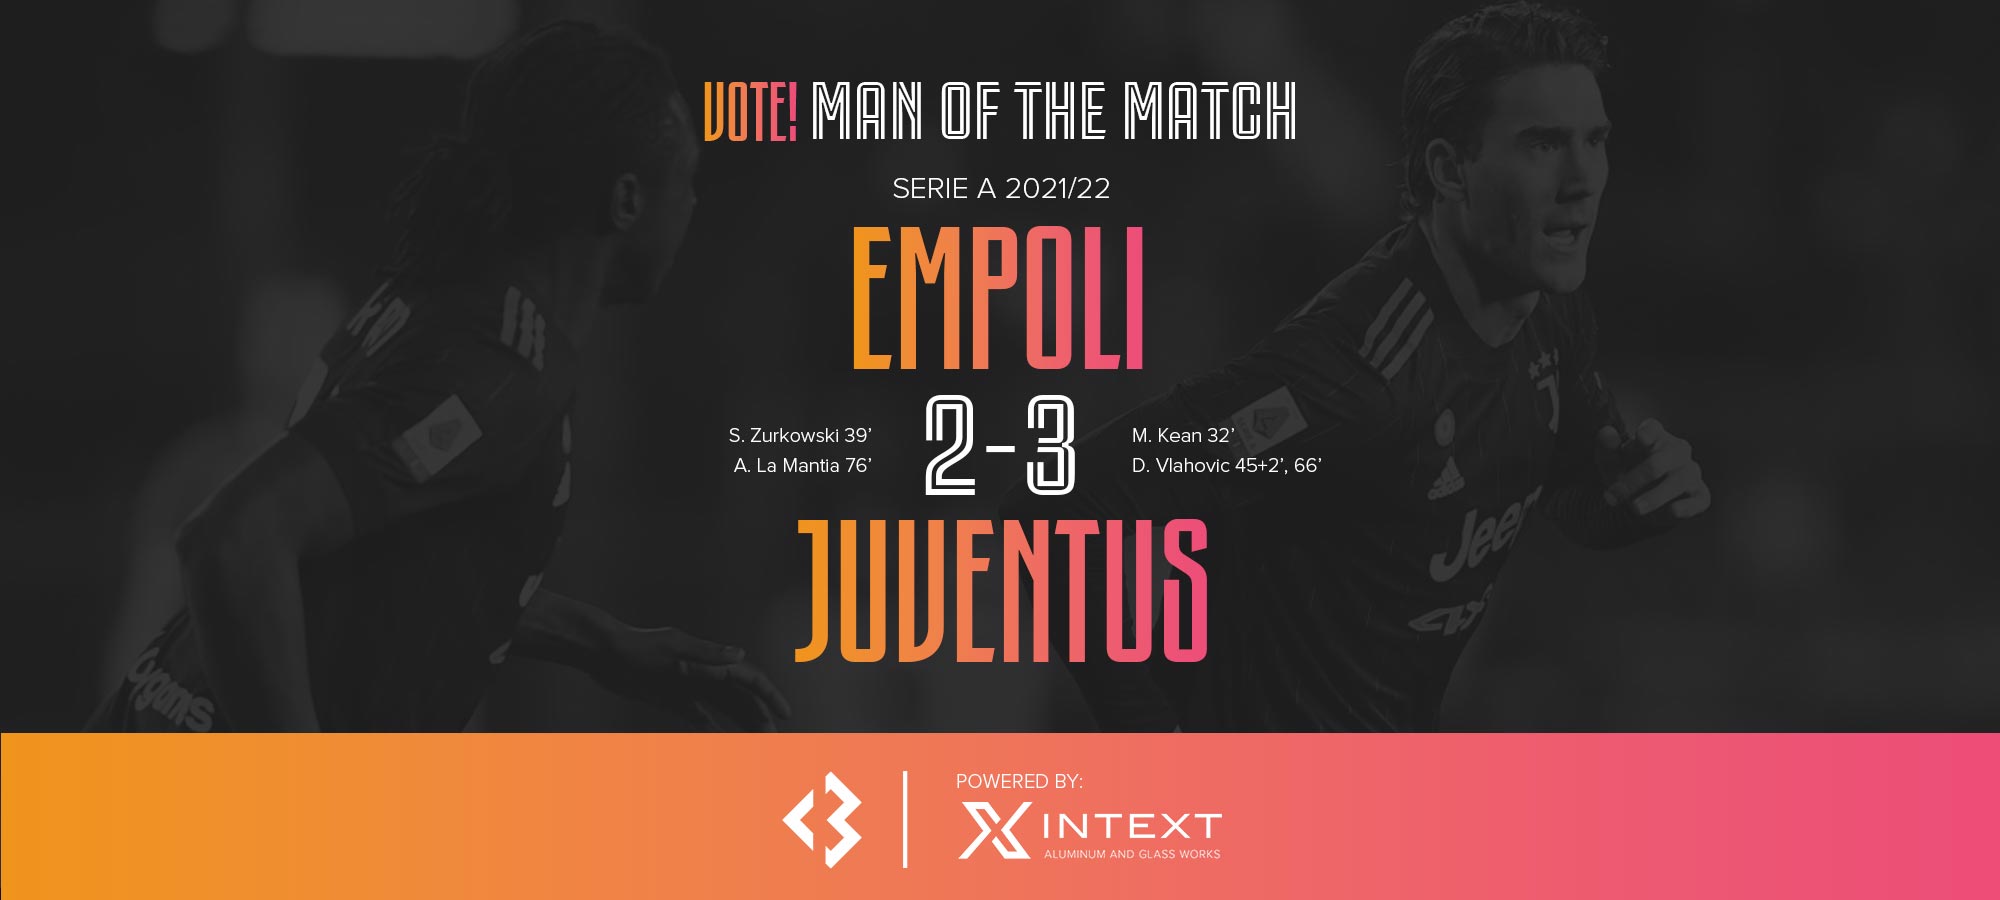 VOTE! The ‘Intext’ Man of the Match: Empoli 2-3 Juventus